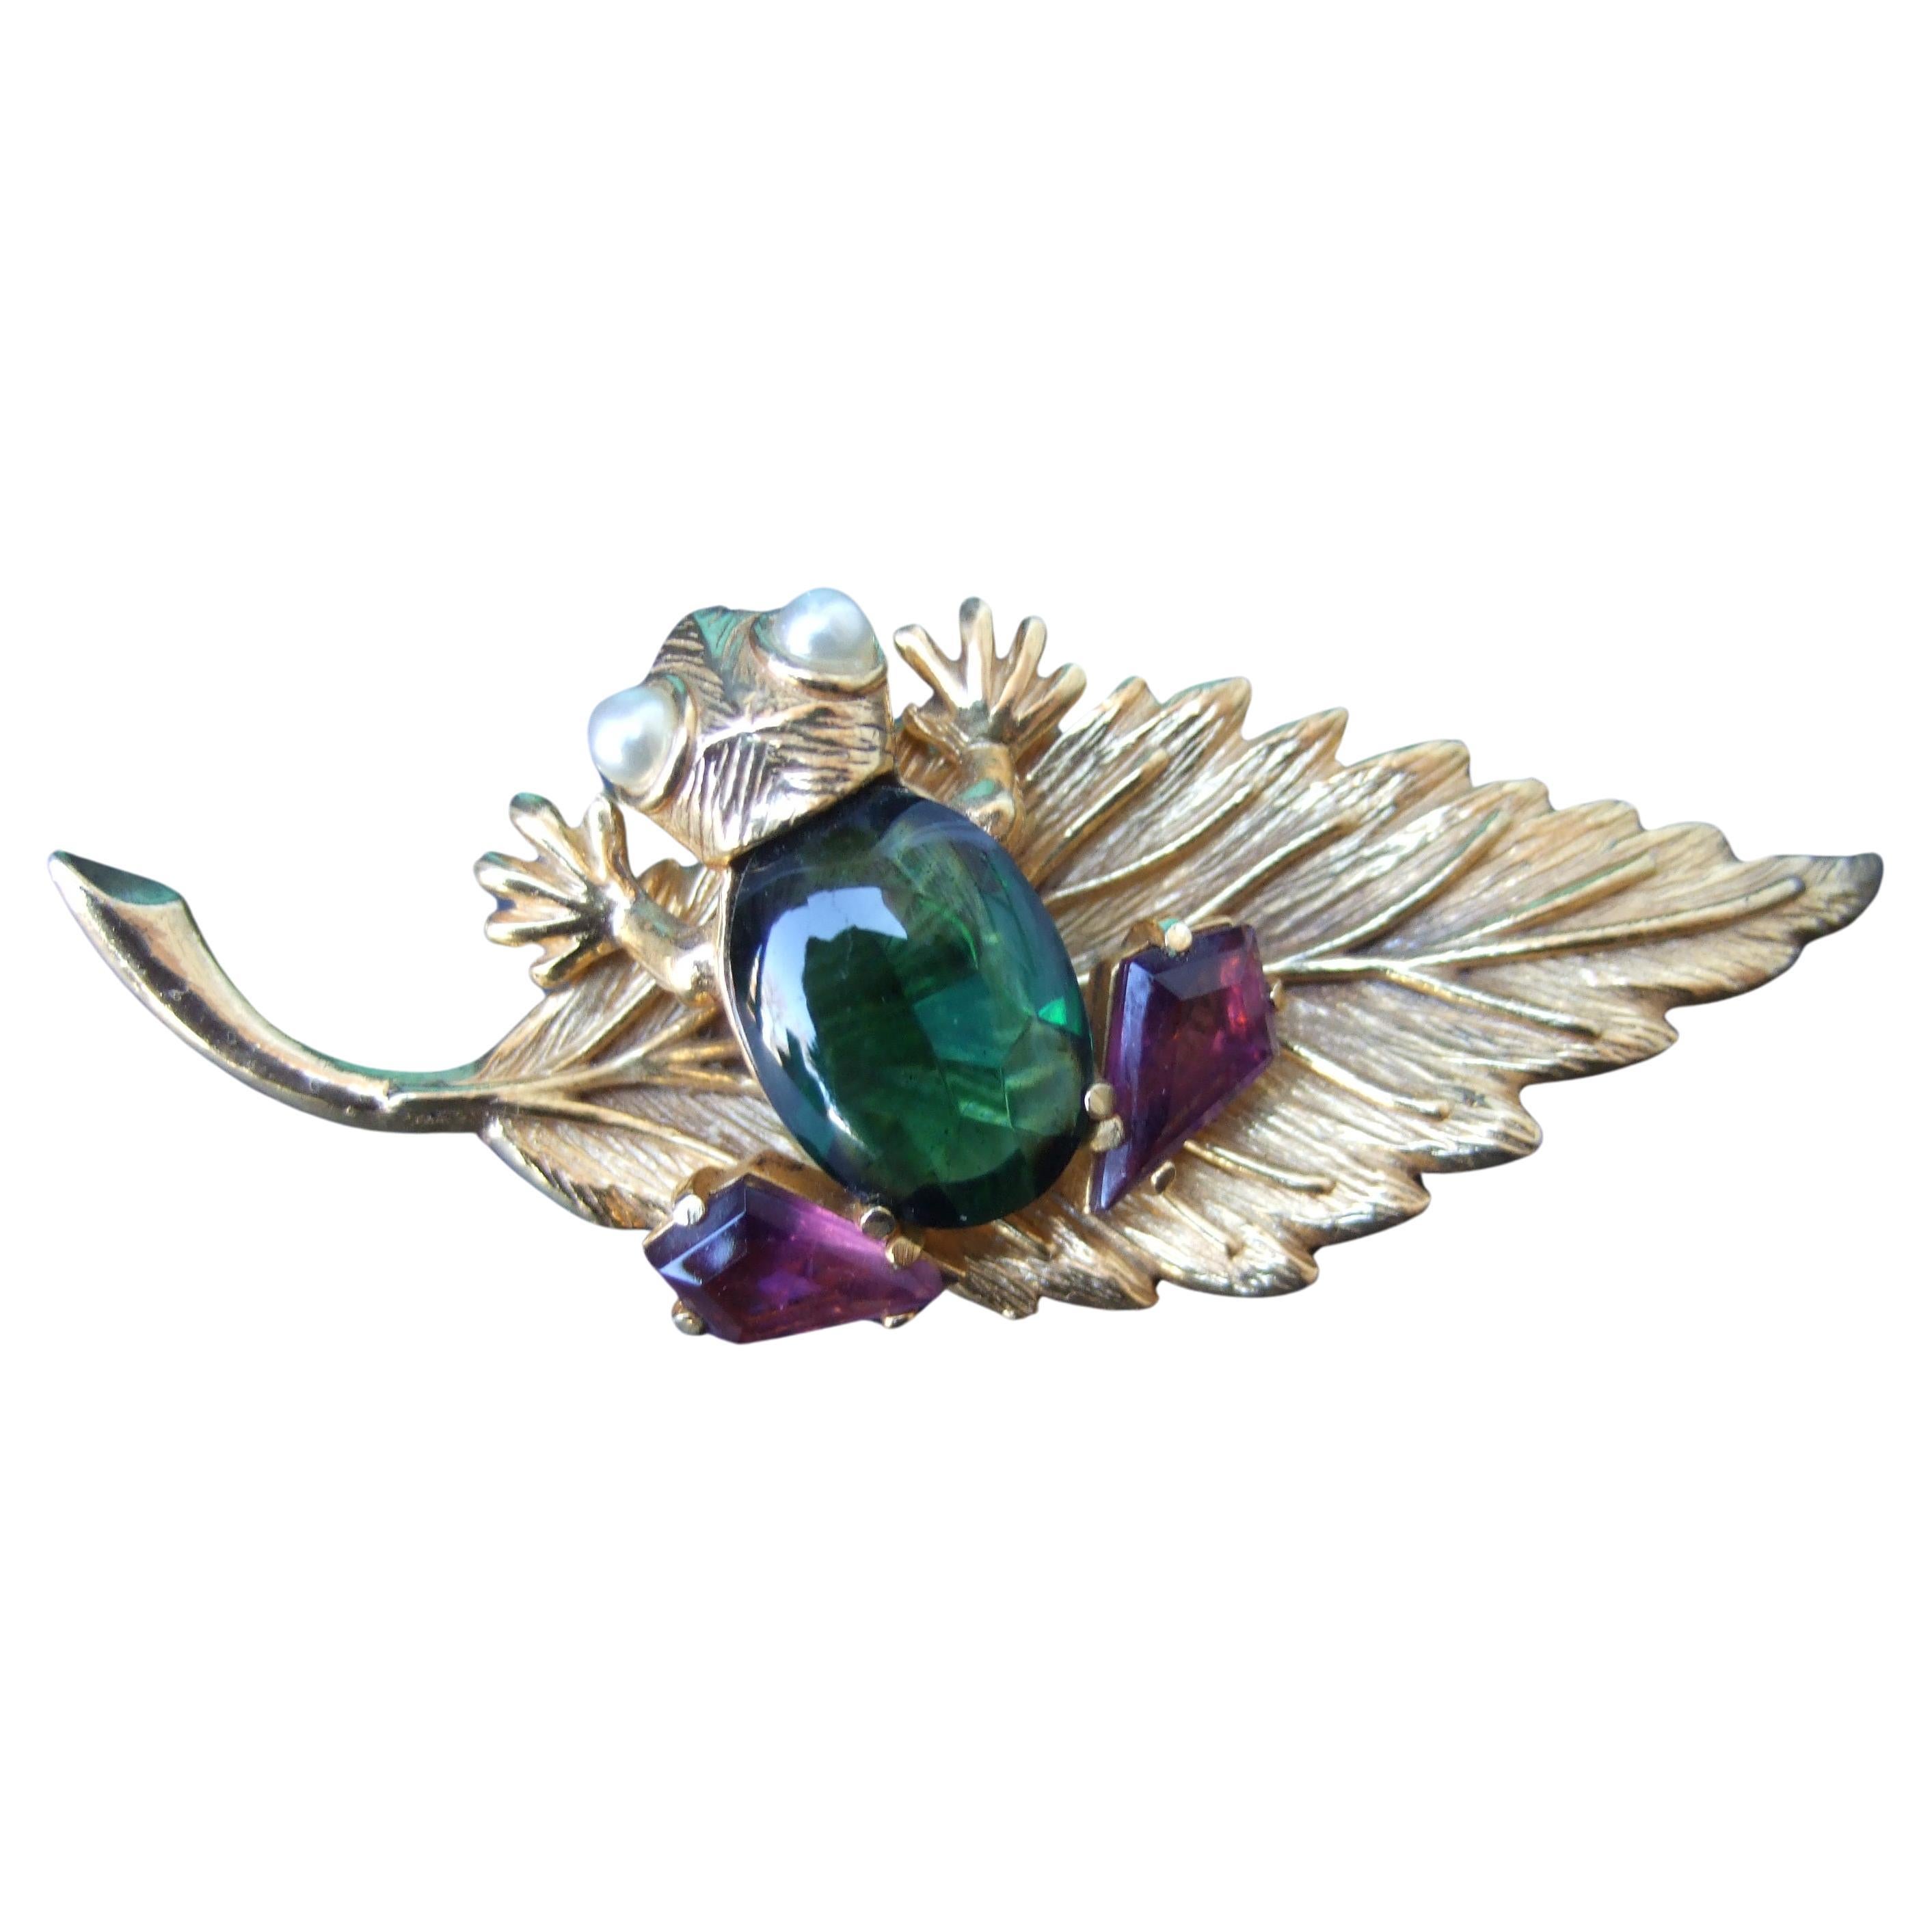 Schiaparelli Rare Charming Jeweled Frog Brooch c 1960 For Sale